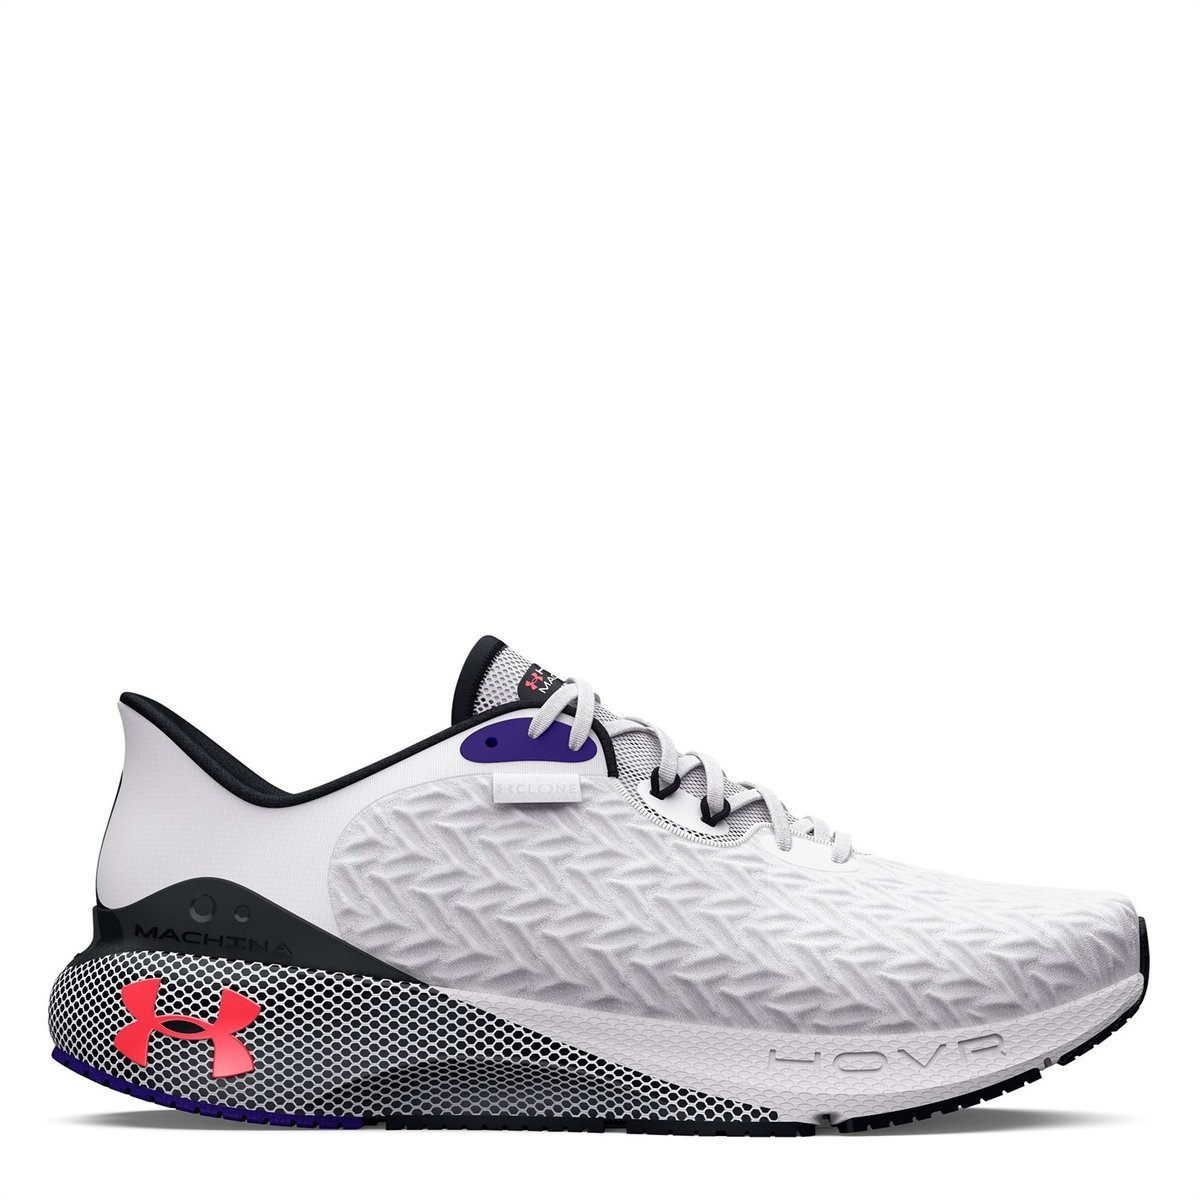 Under Armour Project Rock 5 (White/Halo Grey) 